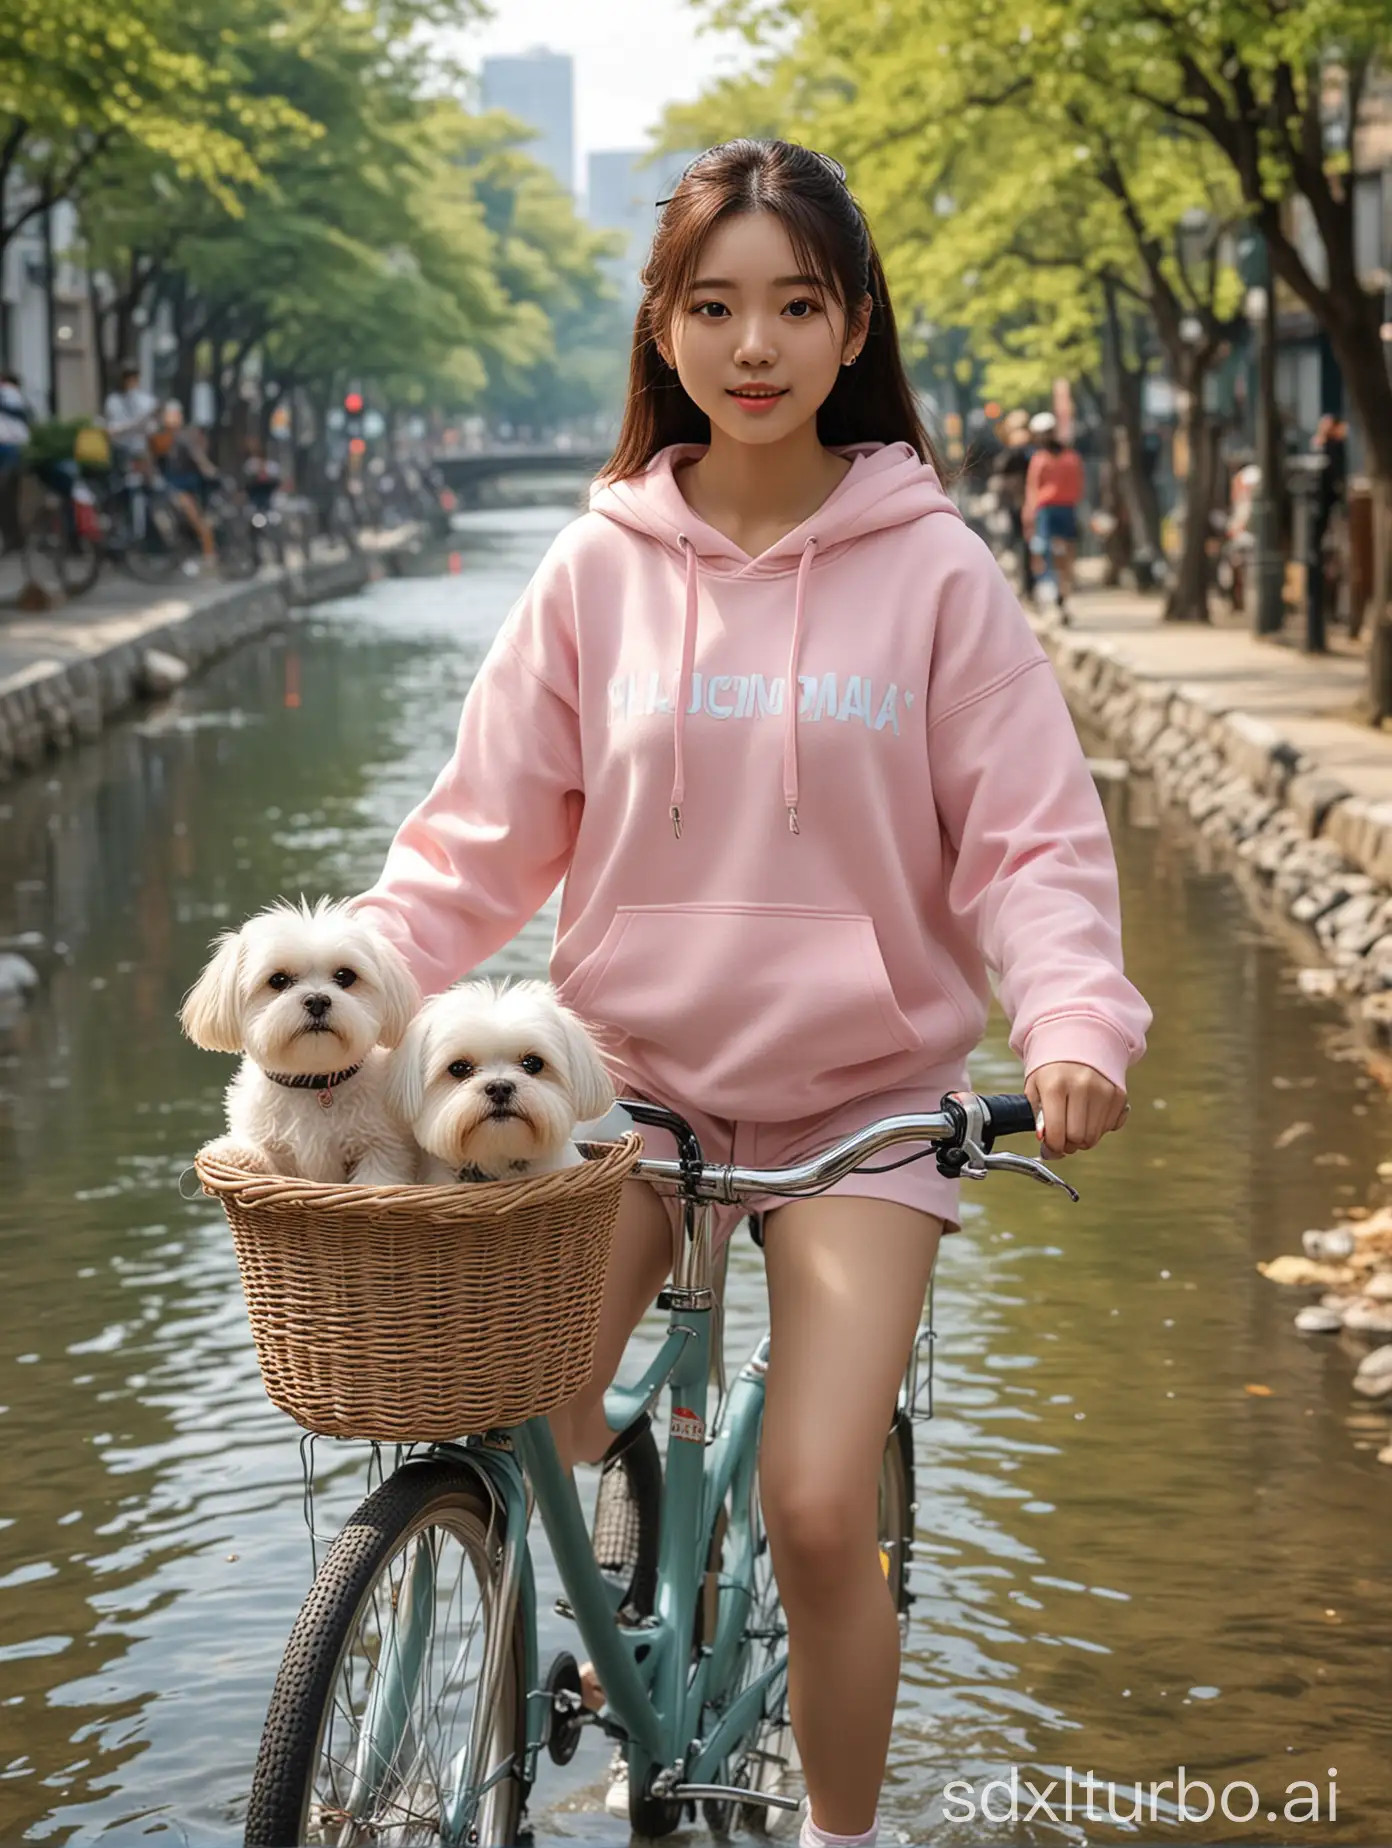 A hyper-realistic, full-view 3D rendering of an 18-year-old girl with Korean idol style, wearing a pastel-colored hoodie, riding a different colored MTB bicycle along Cheonggyecheon stream in Seoul, with a cute white Shih Tzu-Yorkie mix dog in the bicycle basket, captured with the quality of a 24-70mm lens camera, with micro lens detail, and a ring light in the front. Use the face from the uploaded photo. Show the full view of the girl riding the bicycle. Add more details to the scene. Add more sunlight to the scene. Change the girl's hairstyle. Add some reflections on the bicycle frame. Add a soft glow around the girl. Make the dog's ears flap in the wind. Add some ripples in the water. Include a couple of ducks swimming in the stream. Add some sunlight reflections on the water. Negative Prompts: worst quality, low quality:1.3, nsfw, 3D face, cropped, lowres, text, jpeg artifacts, signature, watermark, username, blurry, artist name, trademark, title, multiple view, Reference sheet, bad anatomy, dark face. Use the face from the uploaded photo. Show the full view of the girl riding the bicycle